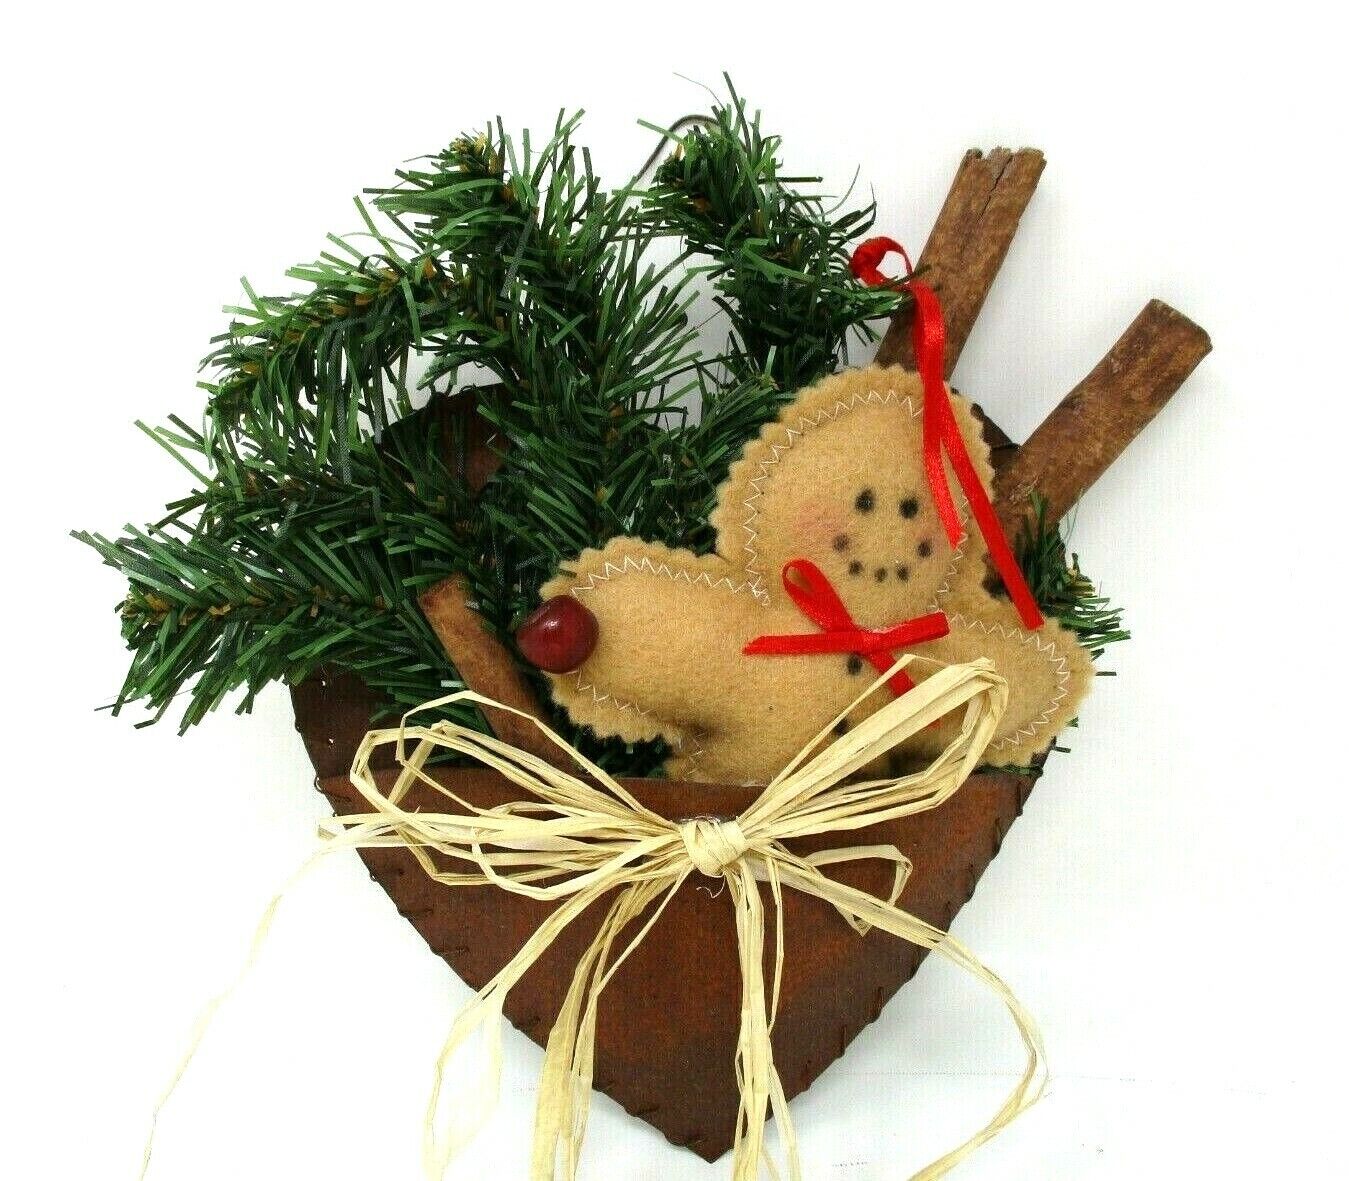 Gingerbread Man Rustic Primitive country Christmas decor rusted metal heart